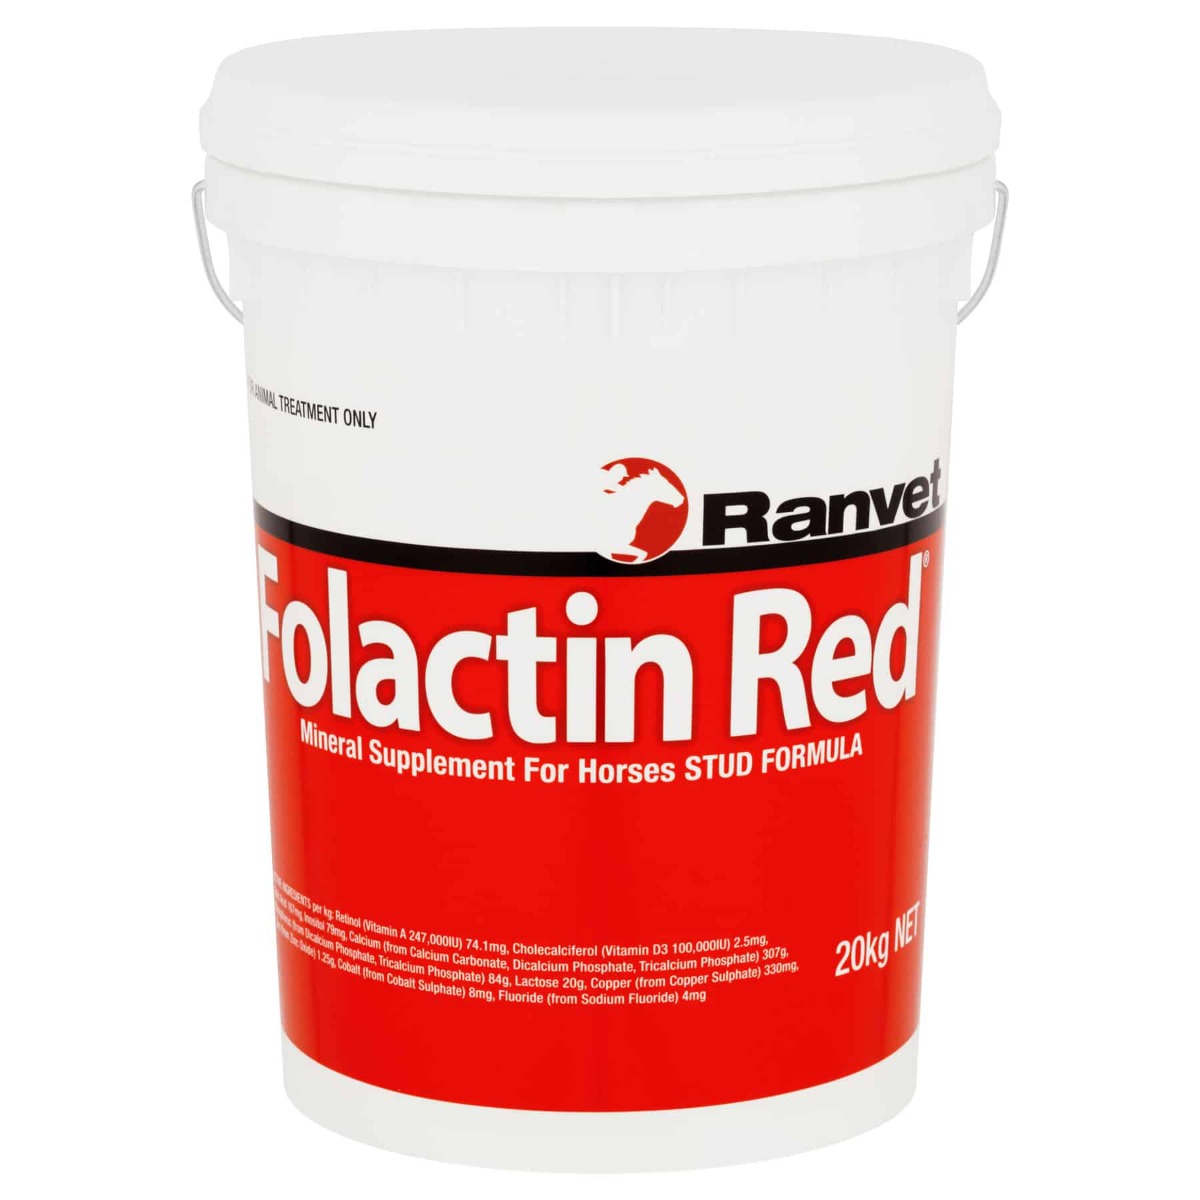 Folactin Red Mineral Supplement 20kg-0